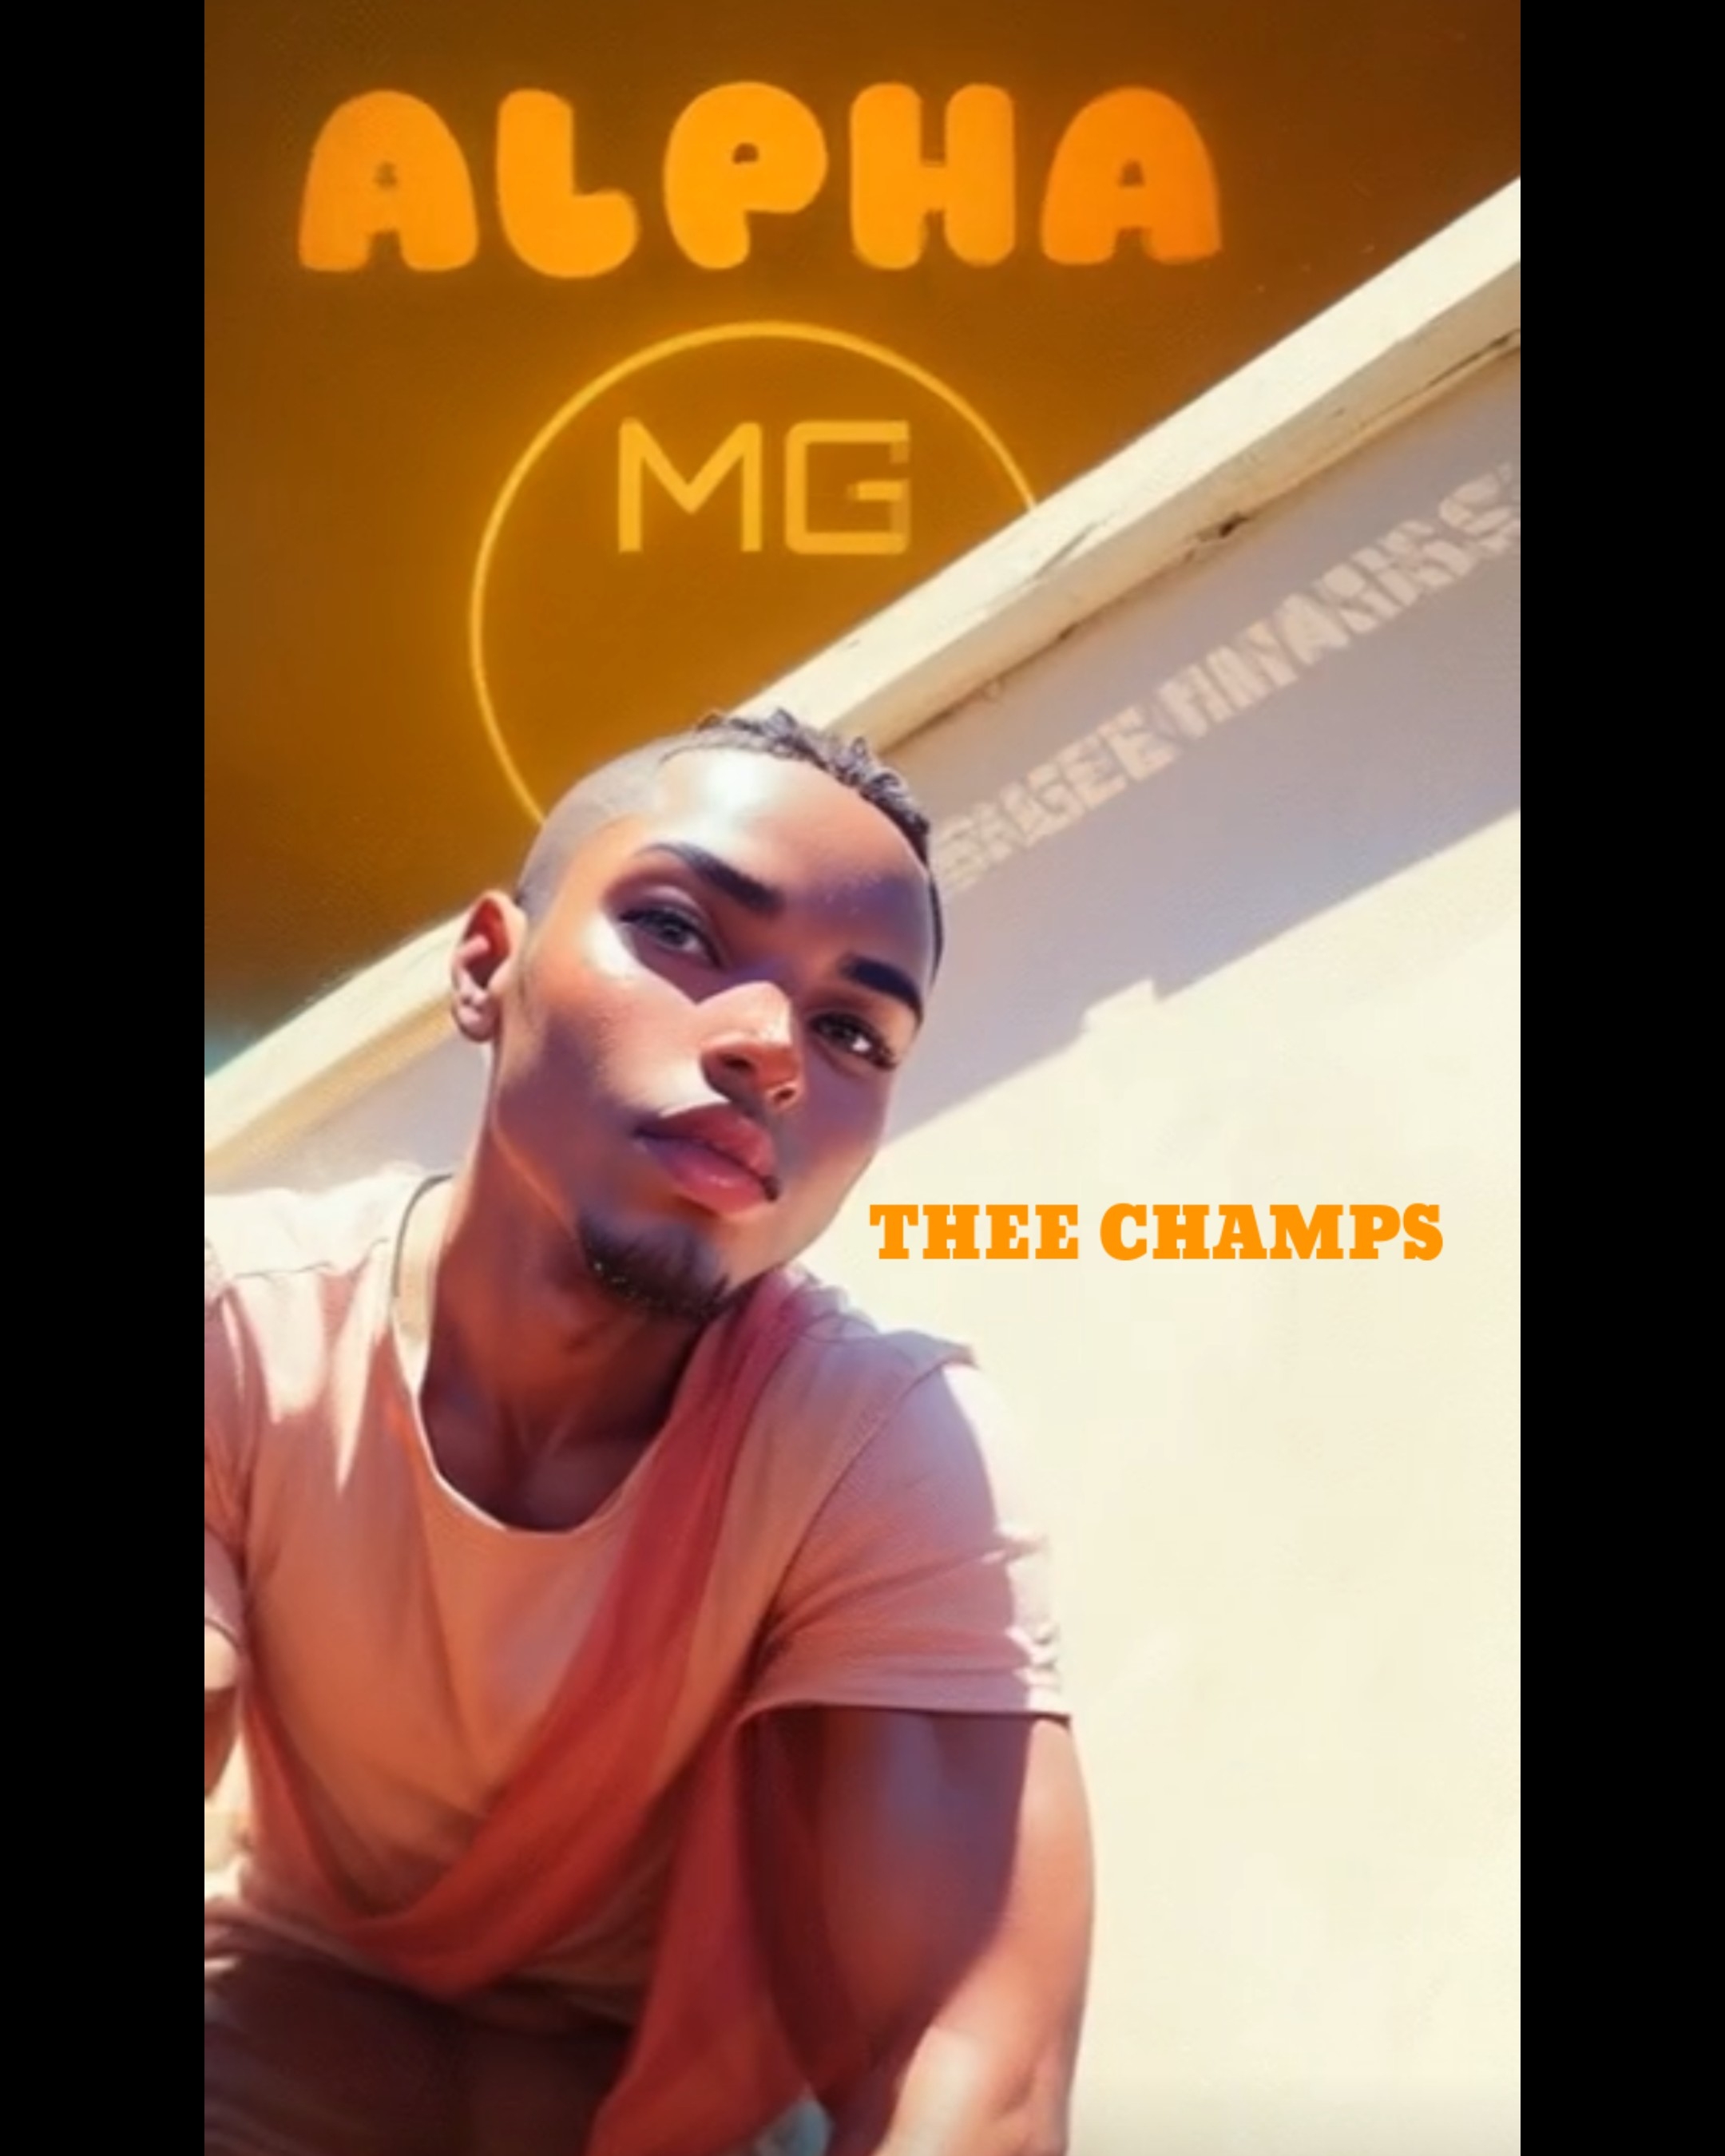 THEE CHAMPS - ALPHA MG